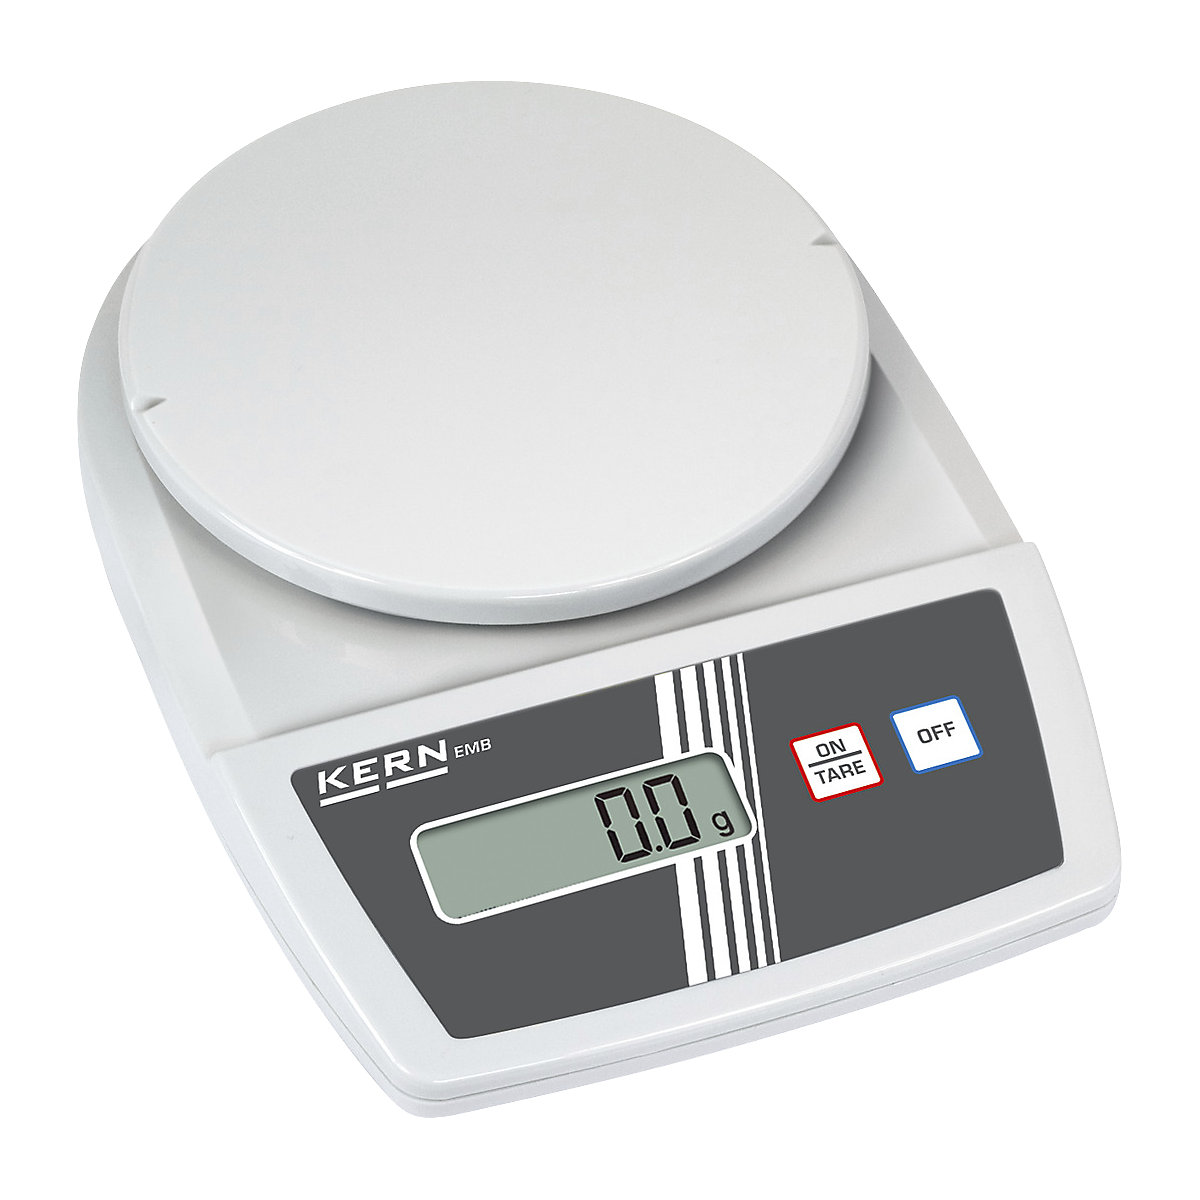 Laboratory scales – KERN, 2 button operation, weighing range up to 500 g, read-out accuracy 0.1 g, weighing plate 150 mm-2